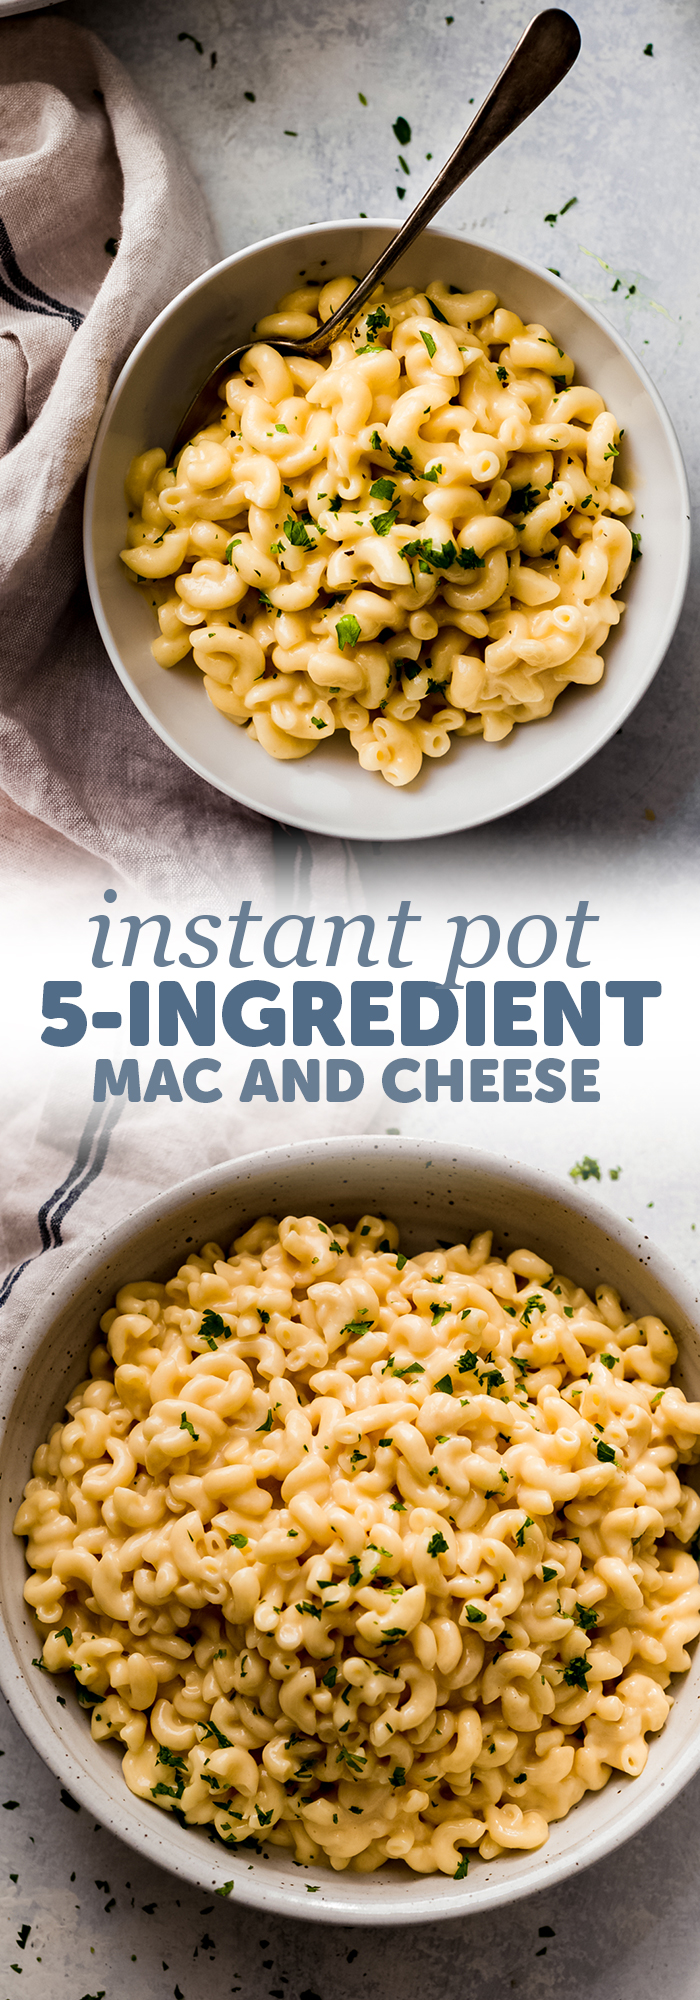 5-Ingredient Instant Pot Mac and Cheese Recipe | Little Spice Jar